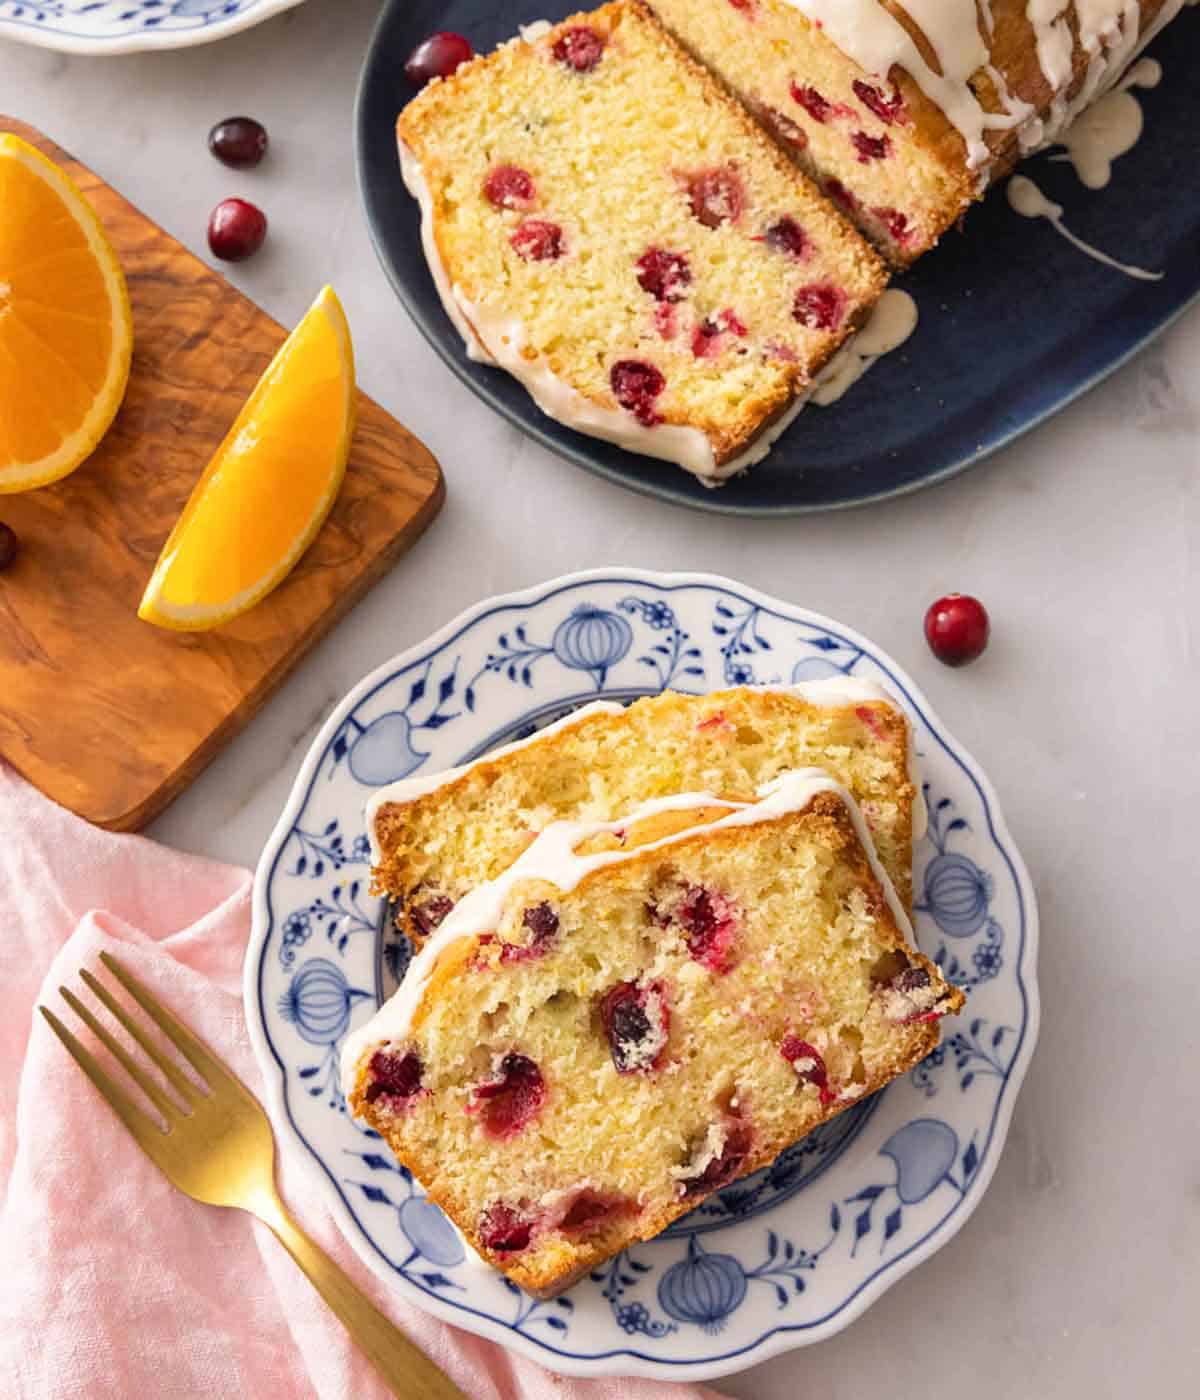 Overhead view of a plate with two slices of cranberry orange bread.